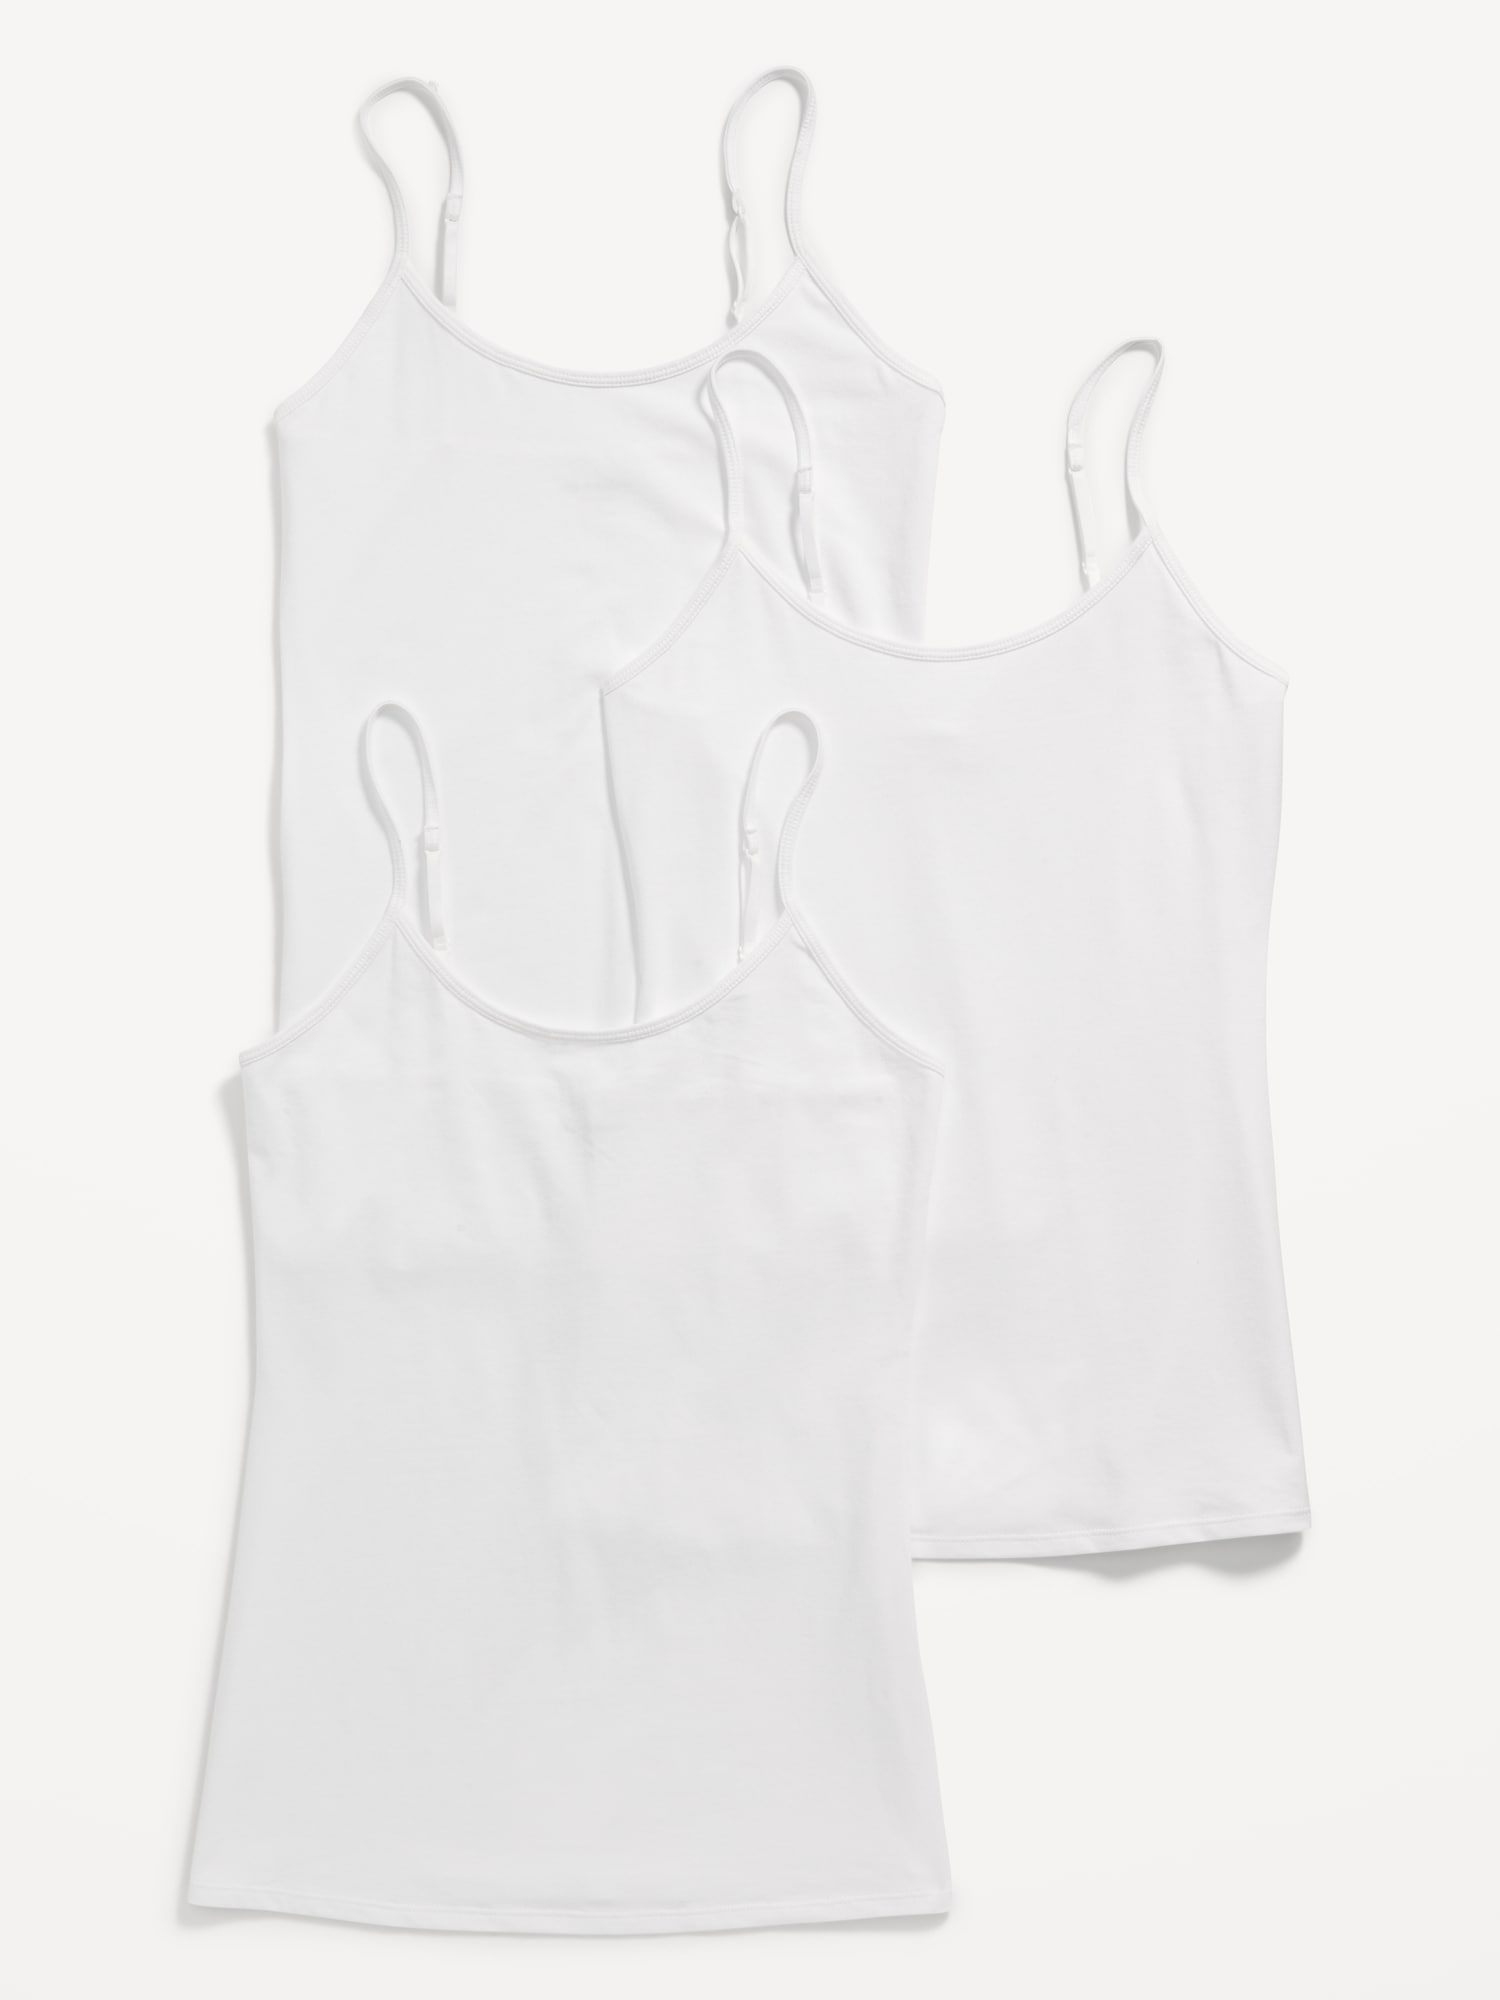 Women's Camisoles Non Adjustable - 100 Cm, White at Rs 99/piece